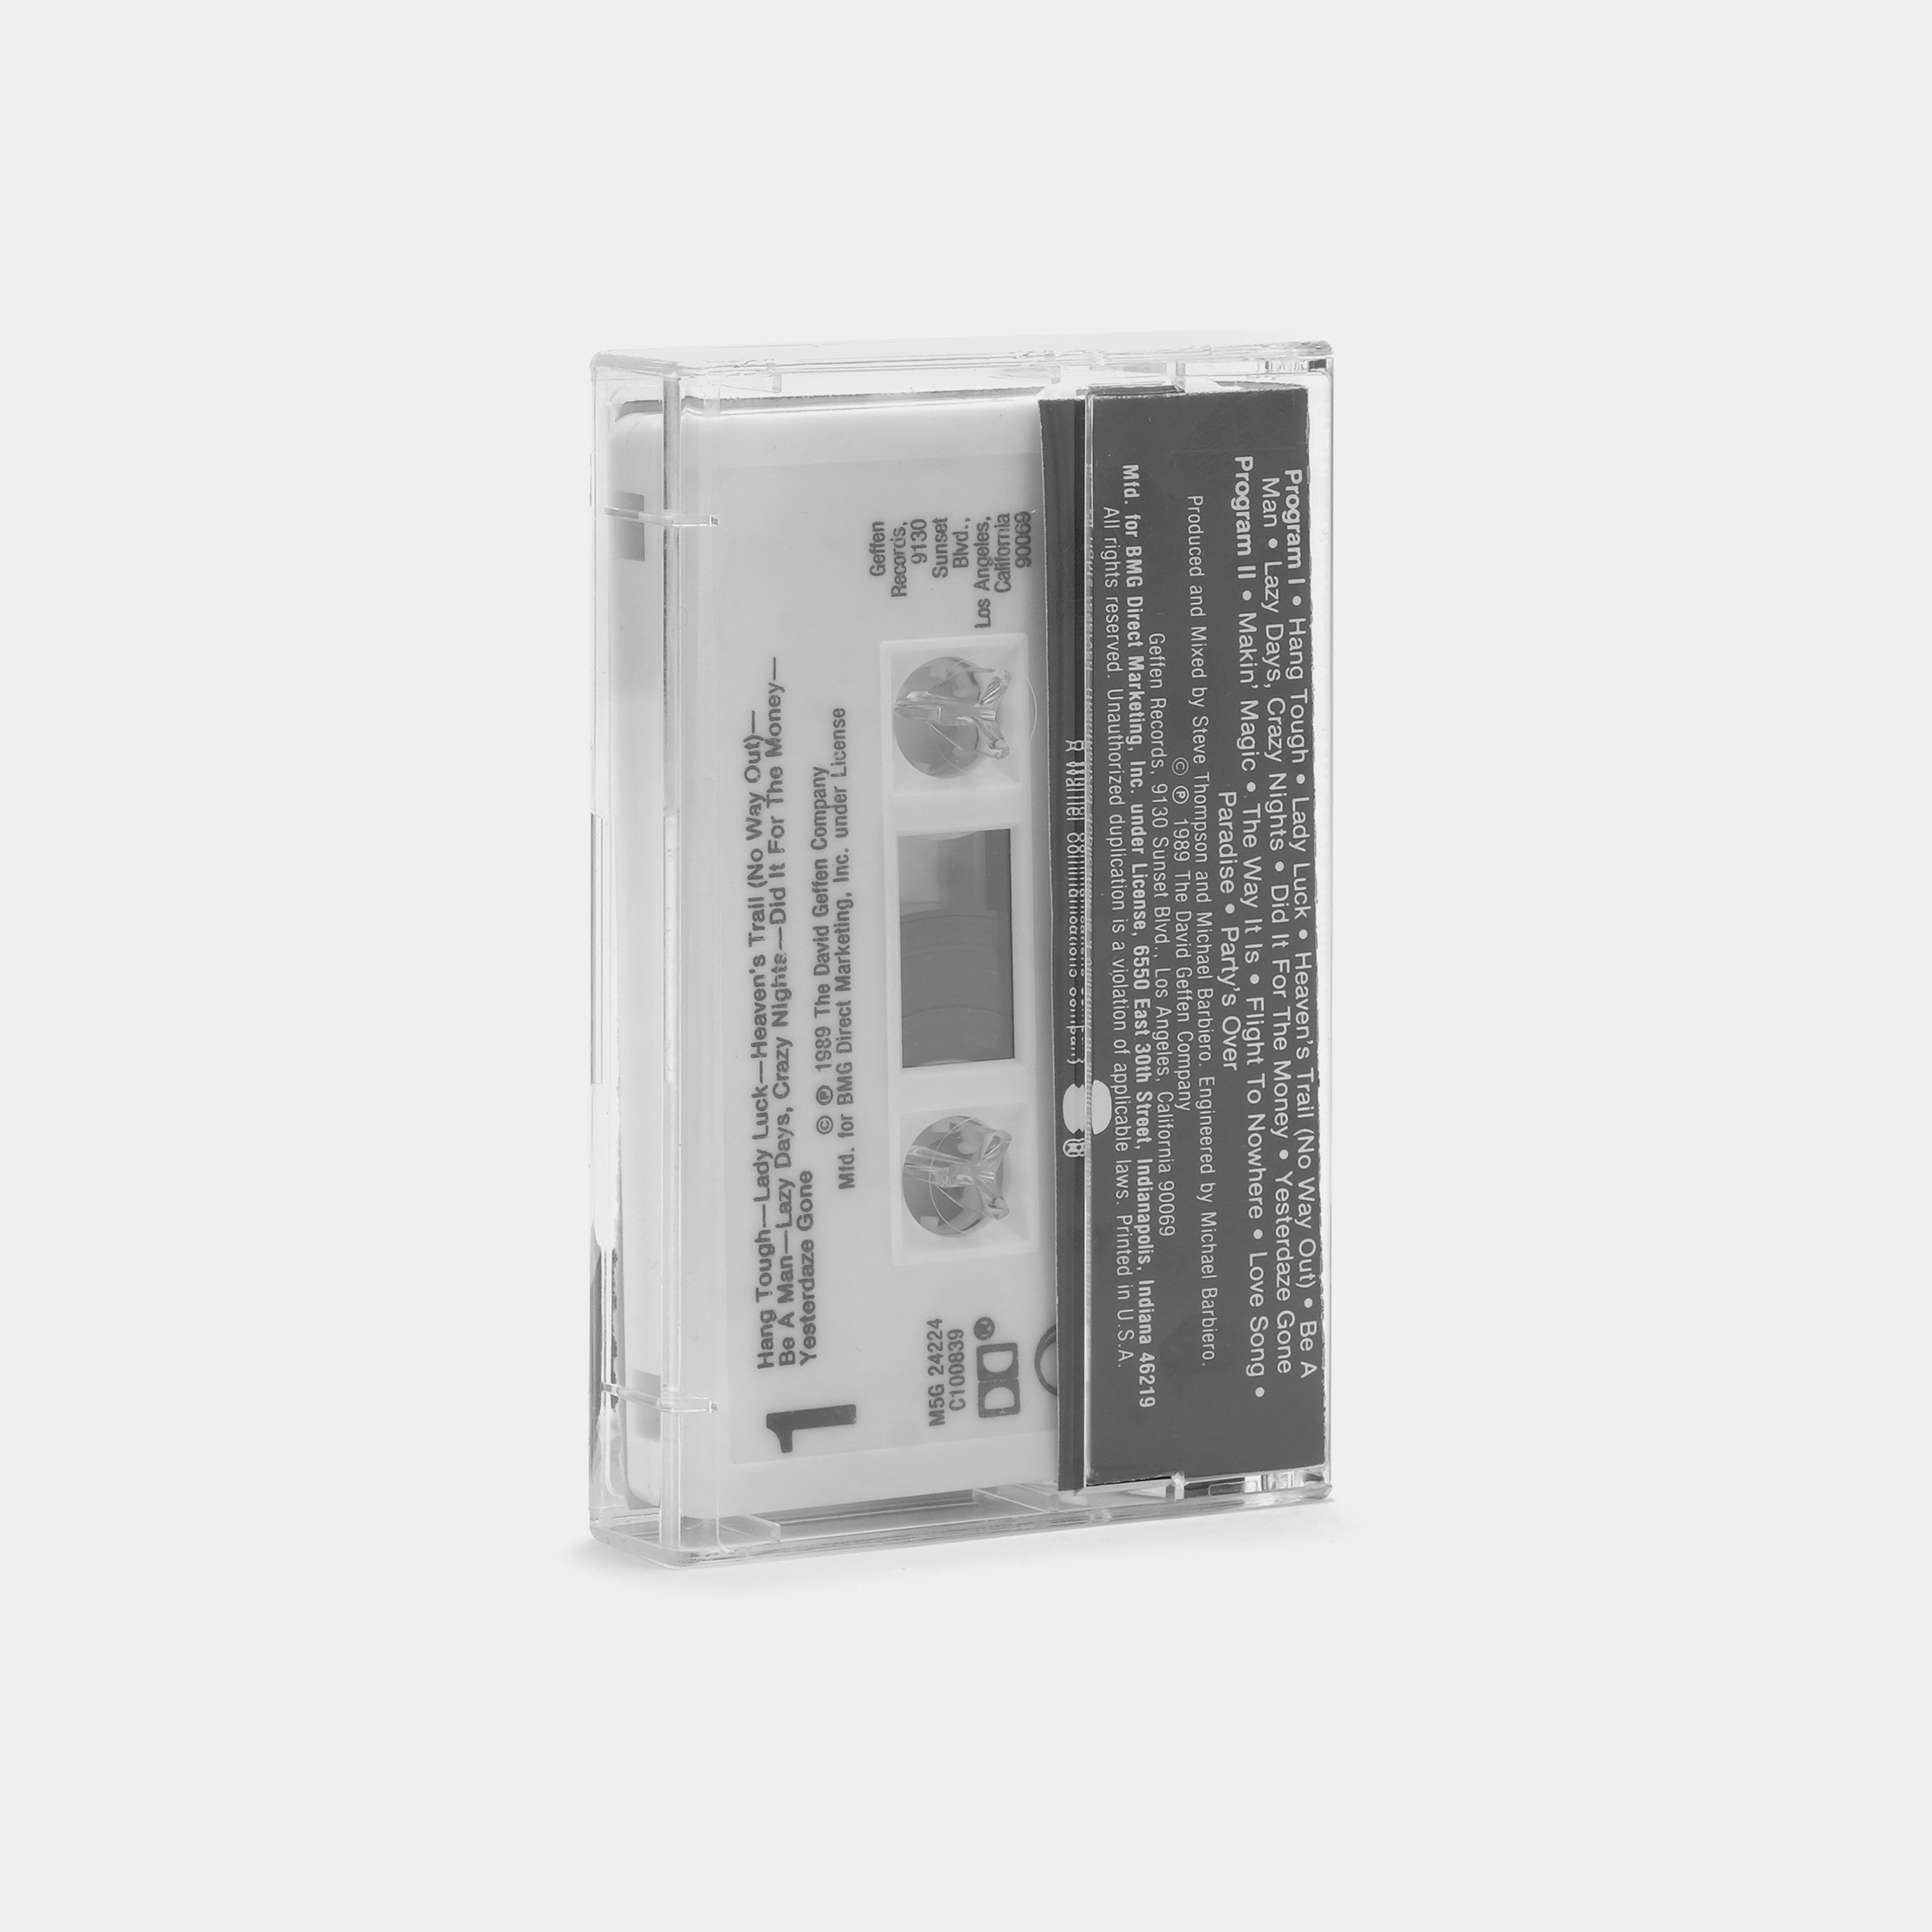 Tesla - The Great Radio Controversy Cassette Tape